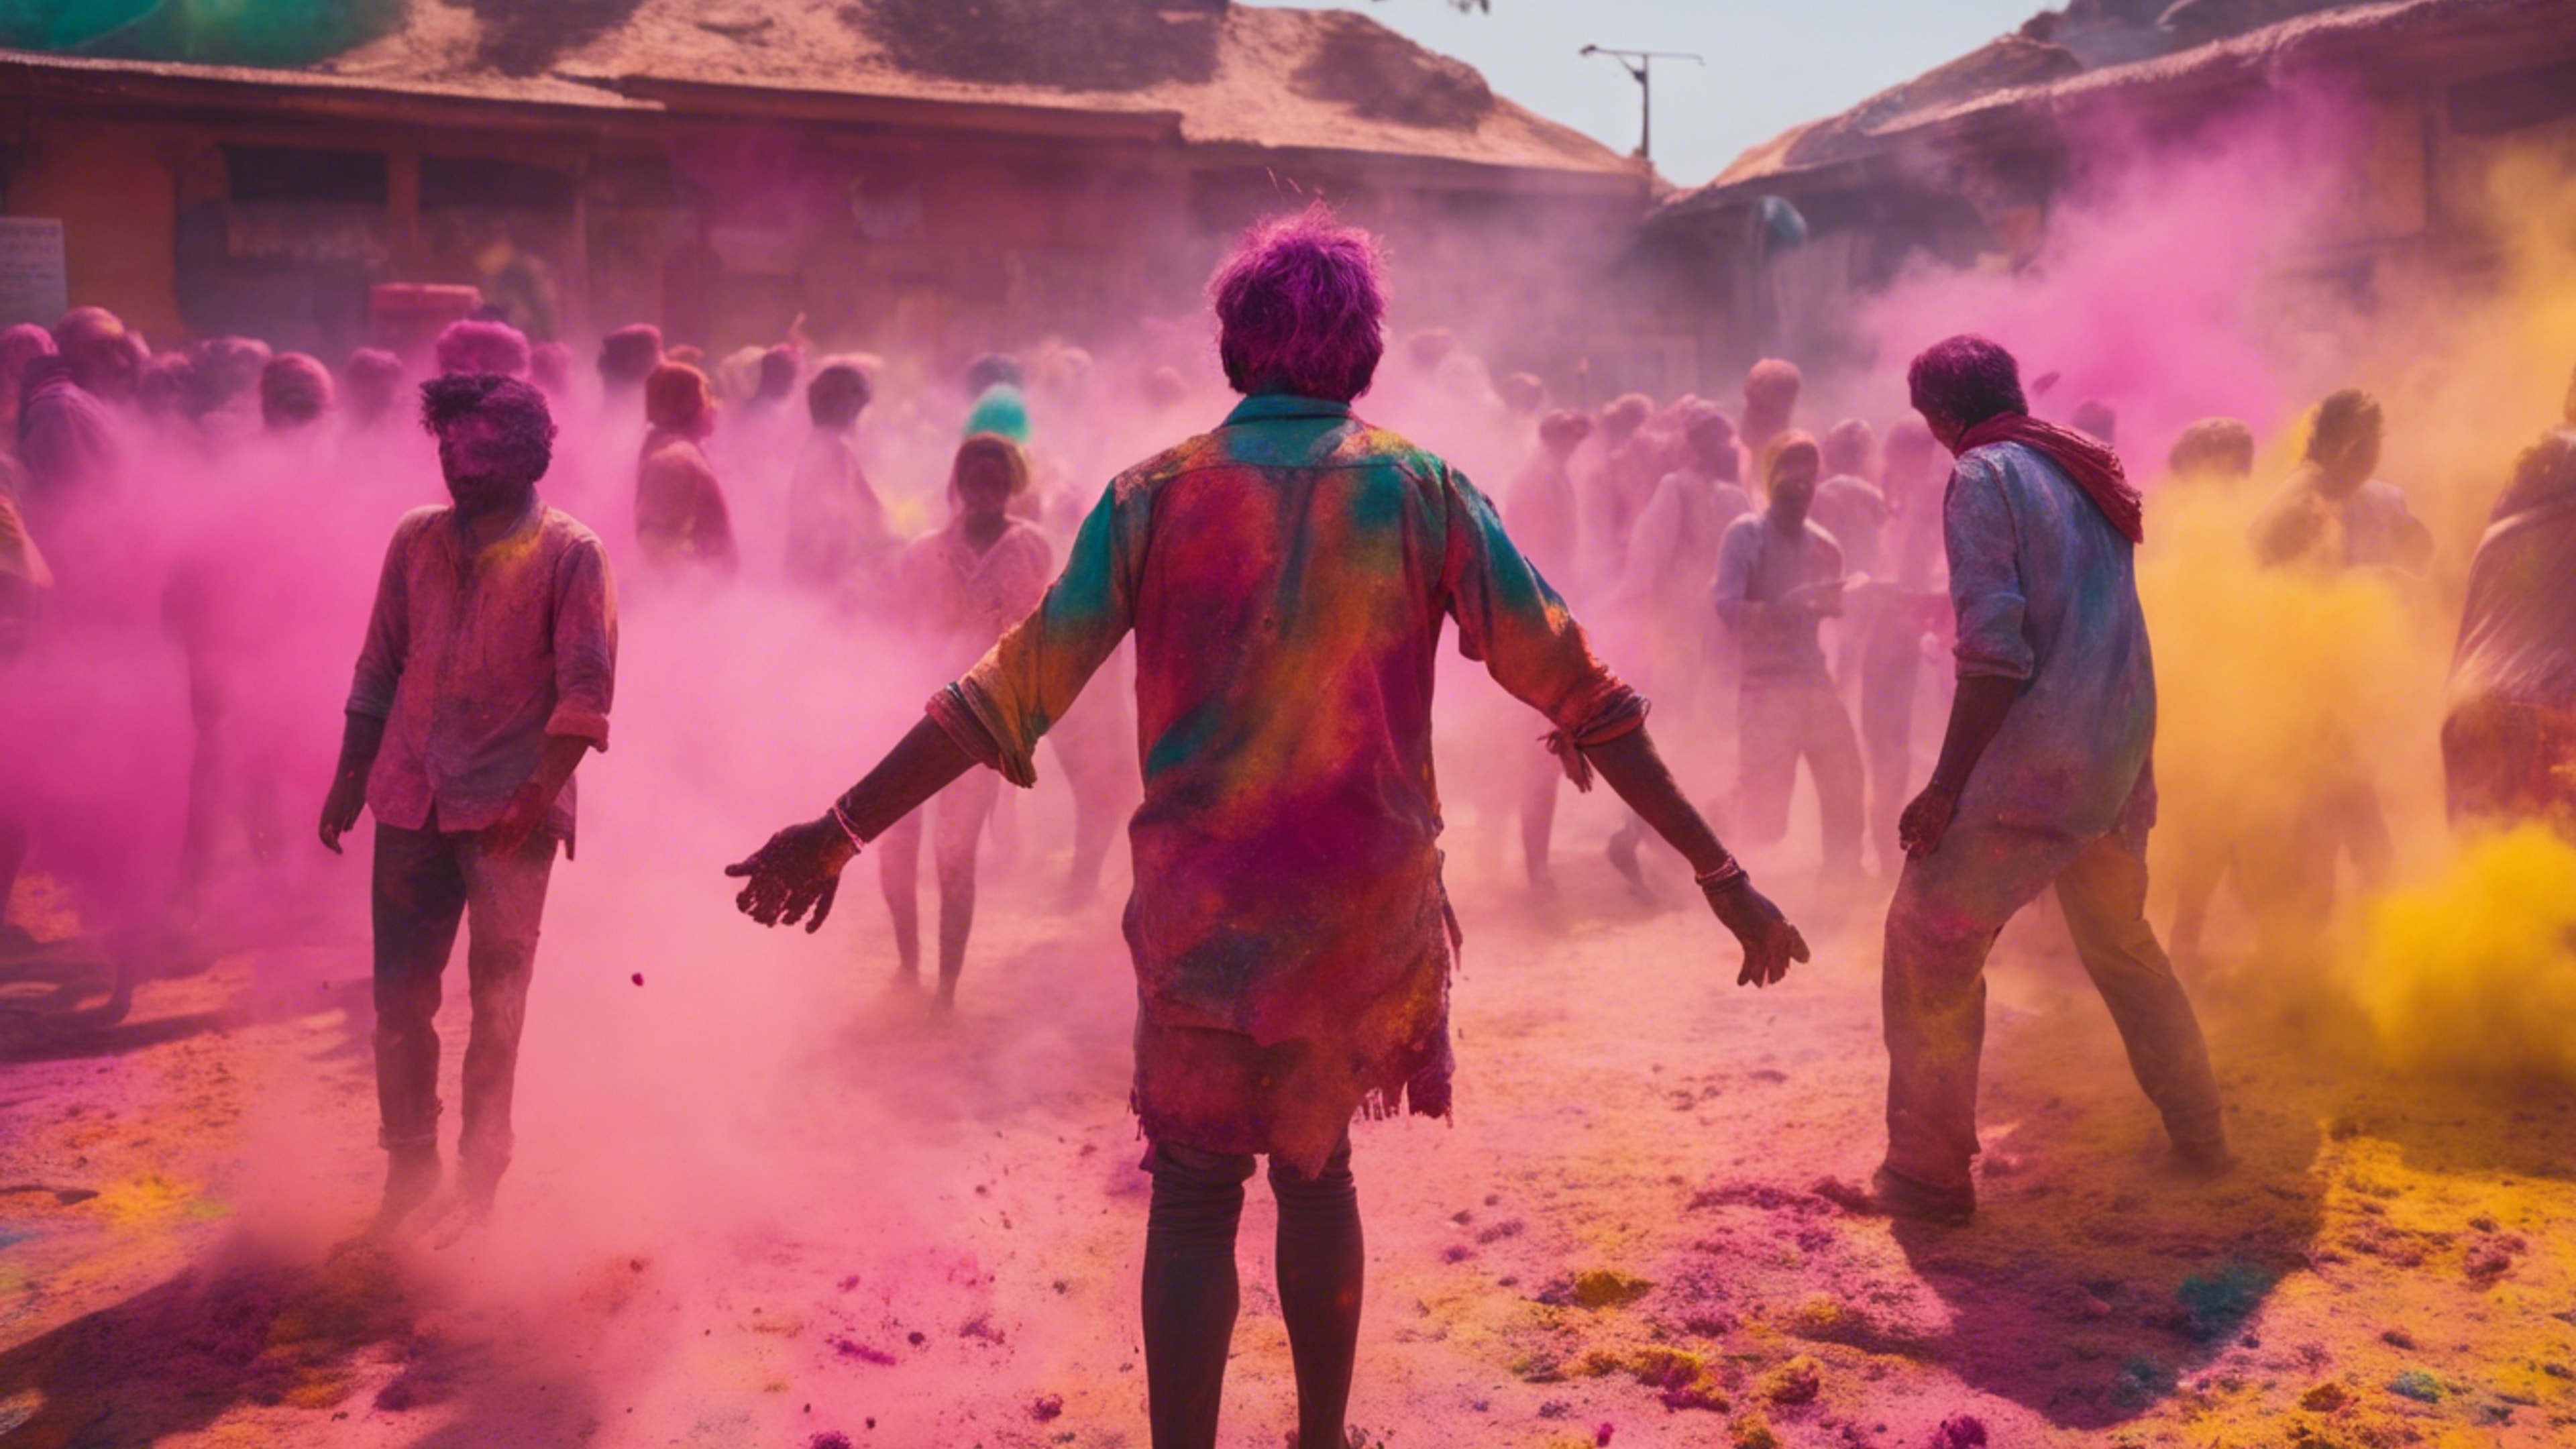 A vibrant and colorful Holi festival with people throwing powdered colors and laughing in the backdrop of an old Indian city.壁紙[6dae05cbdf264a67bd16]